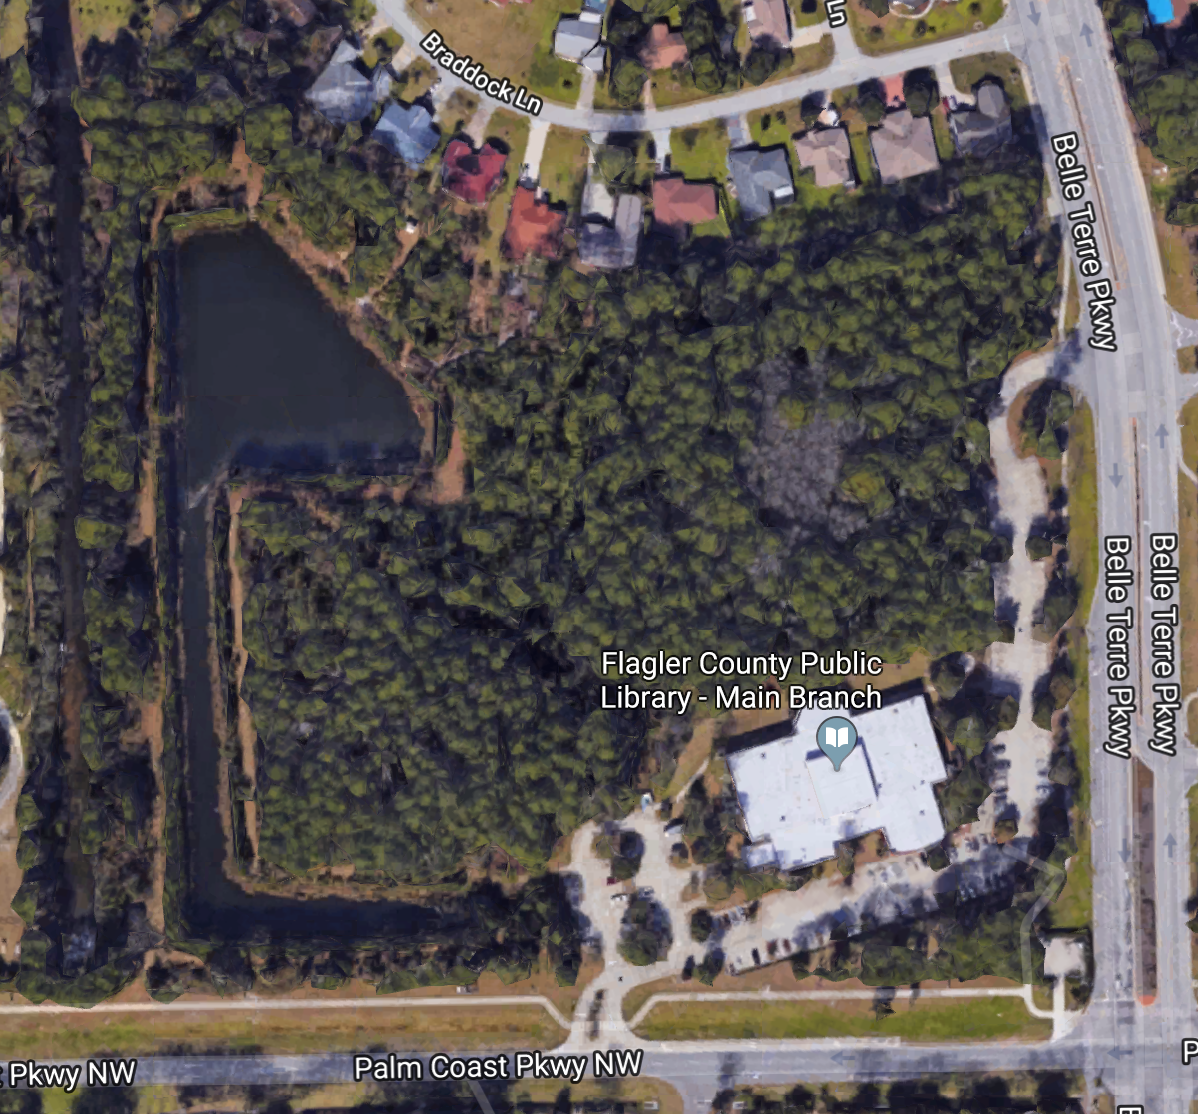 The Flagler County Public Library's 19-acre property. Image courtesy of Google Maps